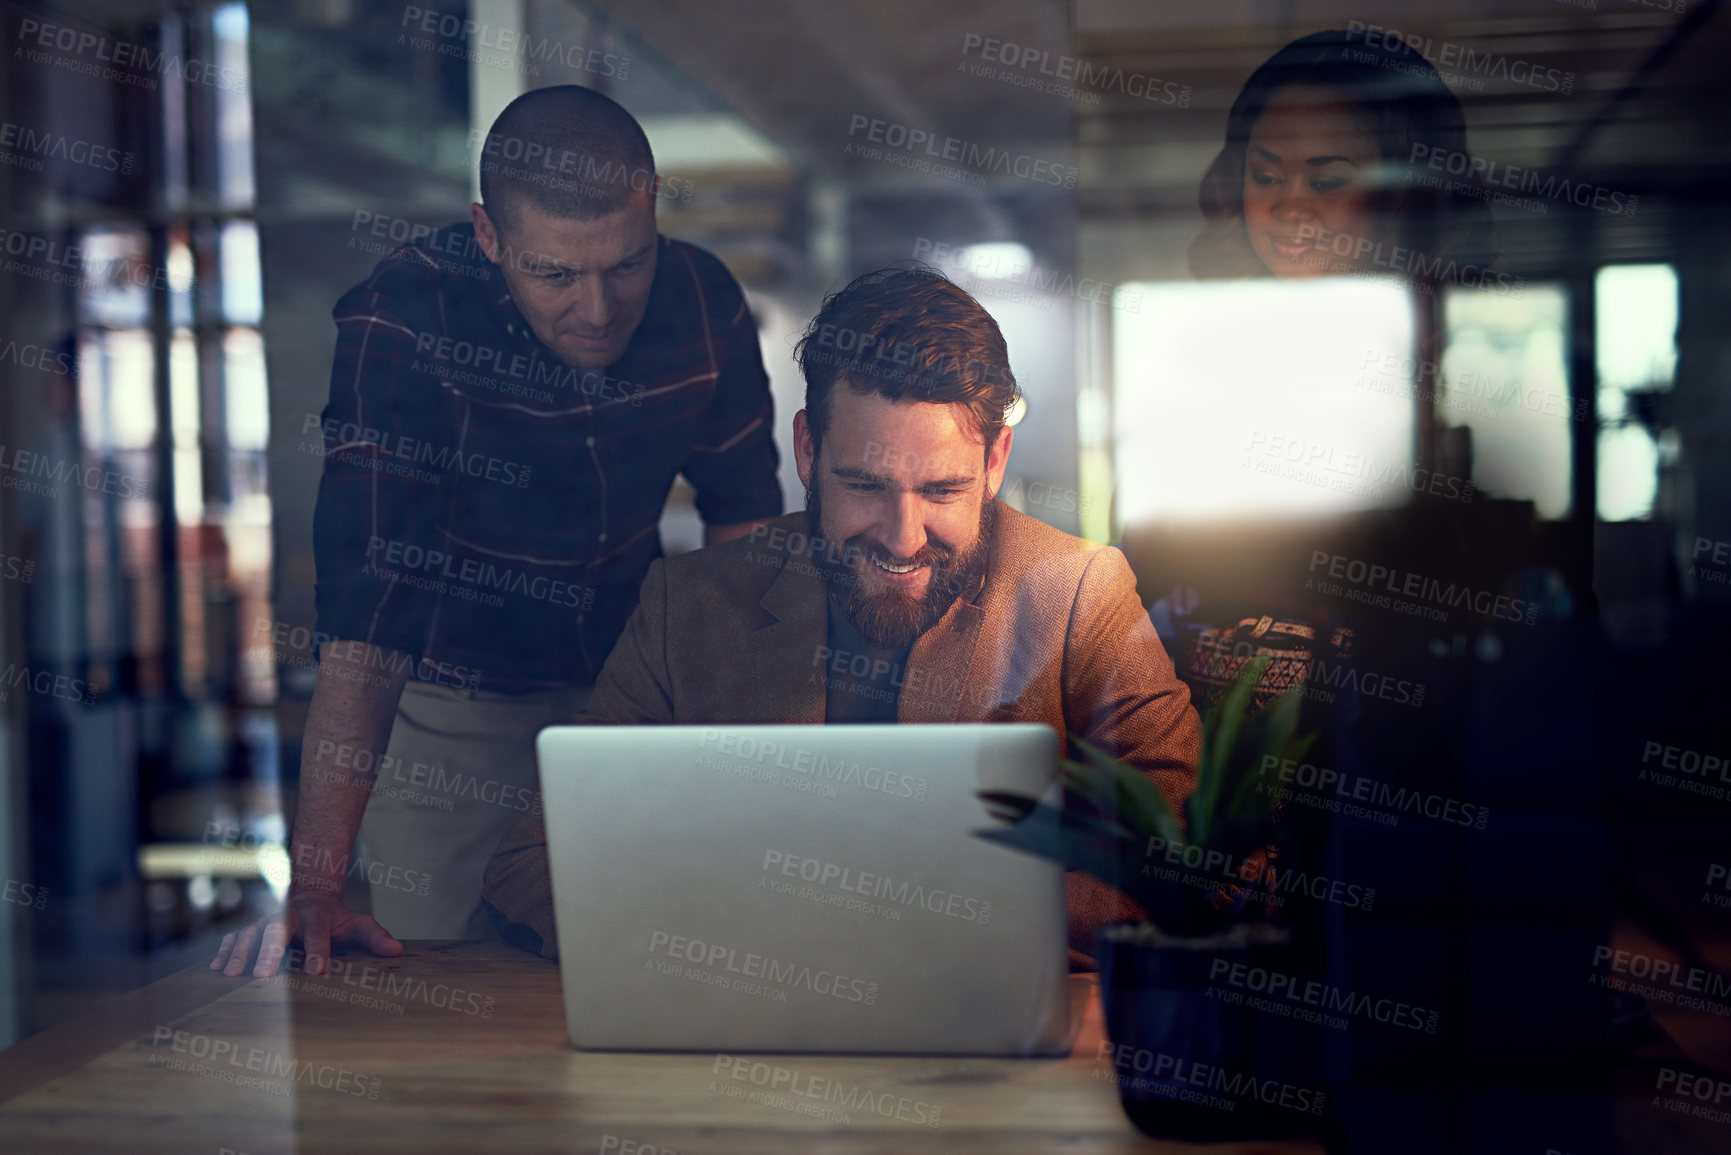 Buy stock photo Shot of a group of work colleagues working together on a laptop and exchanging ideas in the office